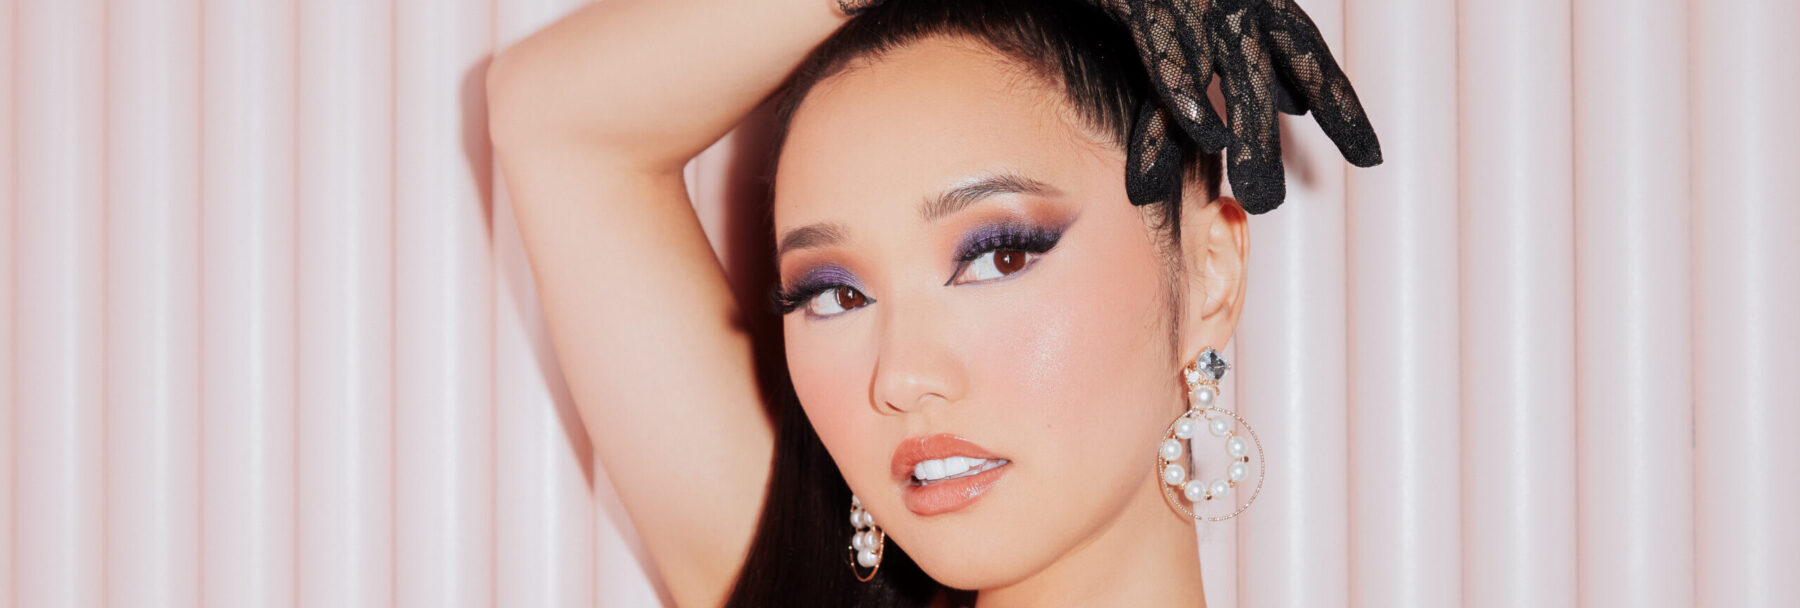 Jenn Im with eye makeup and earrings posing in front of a pick background.